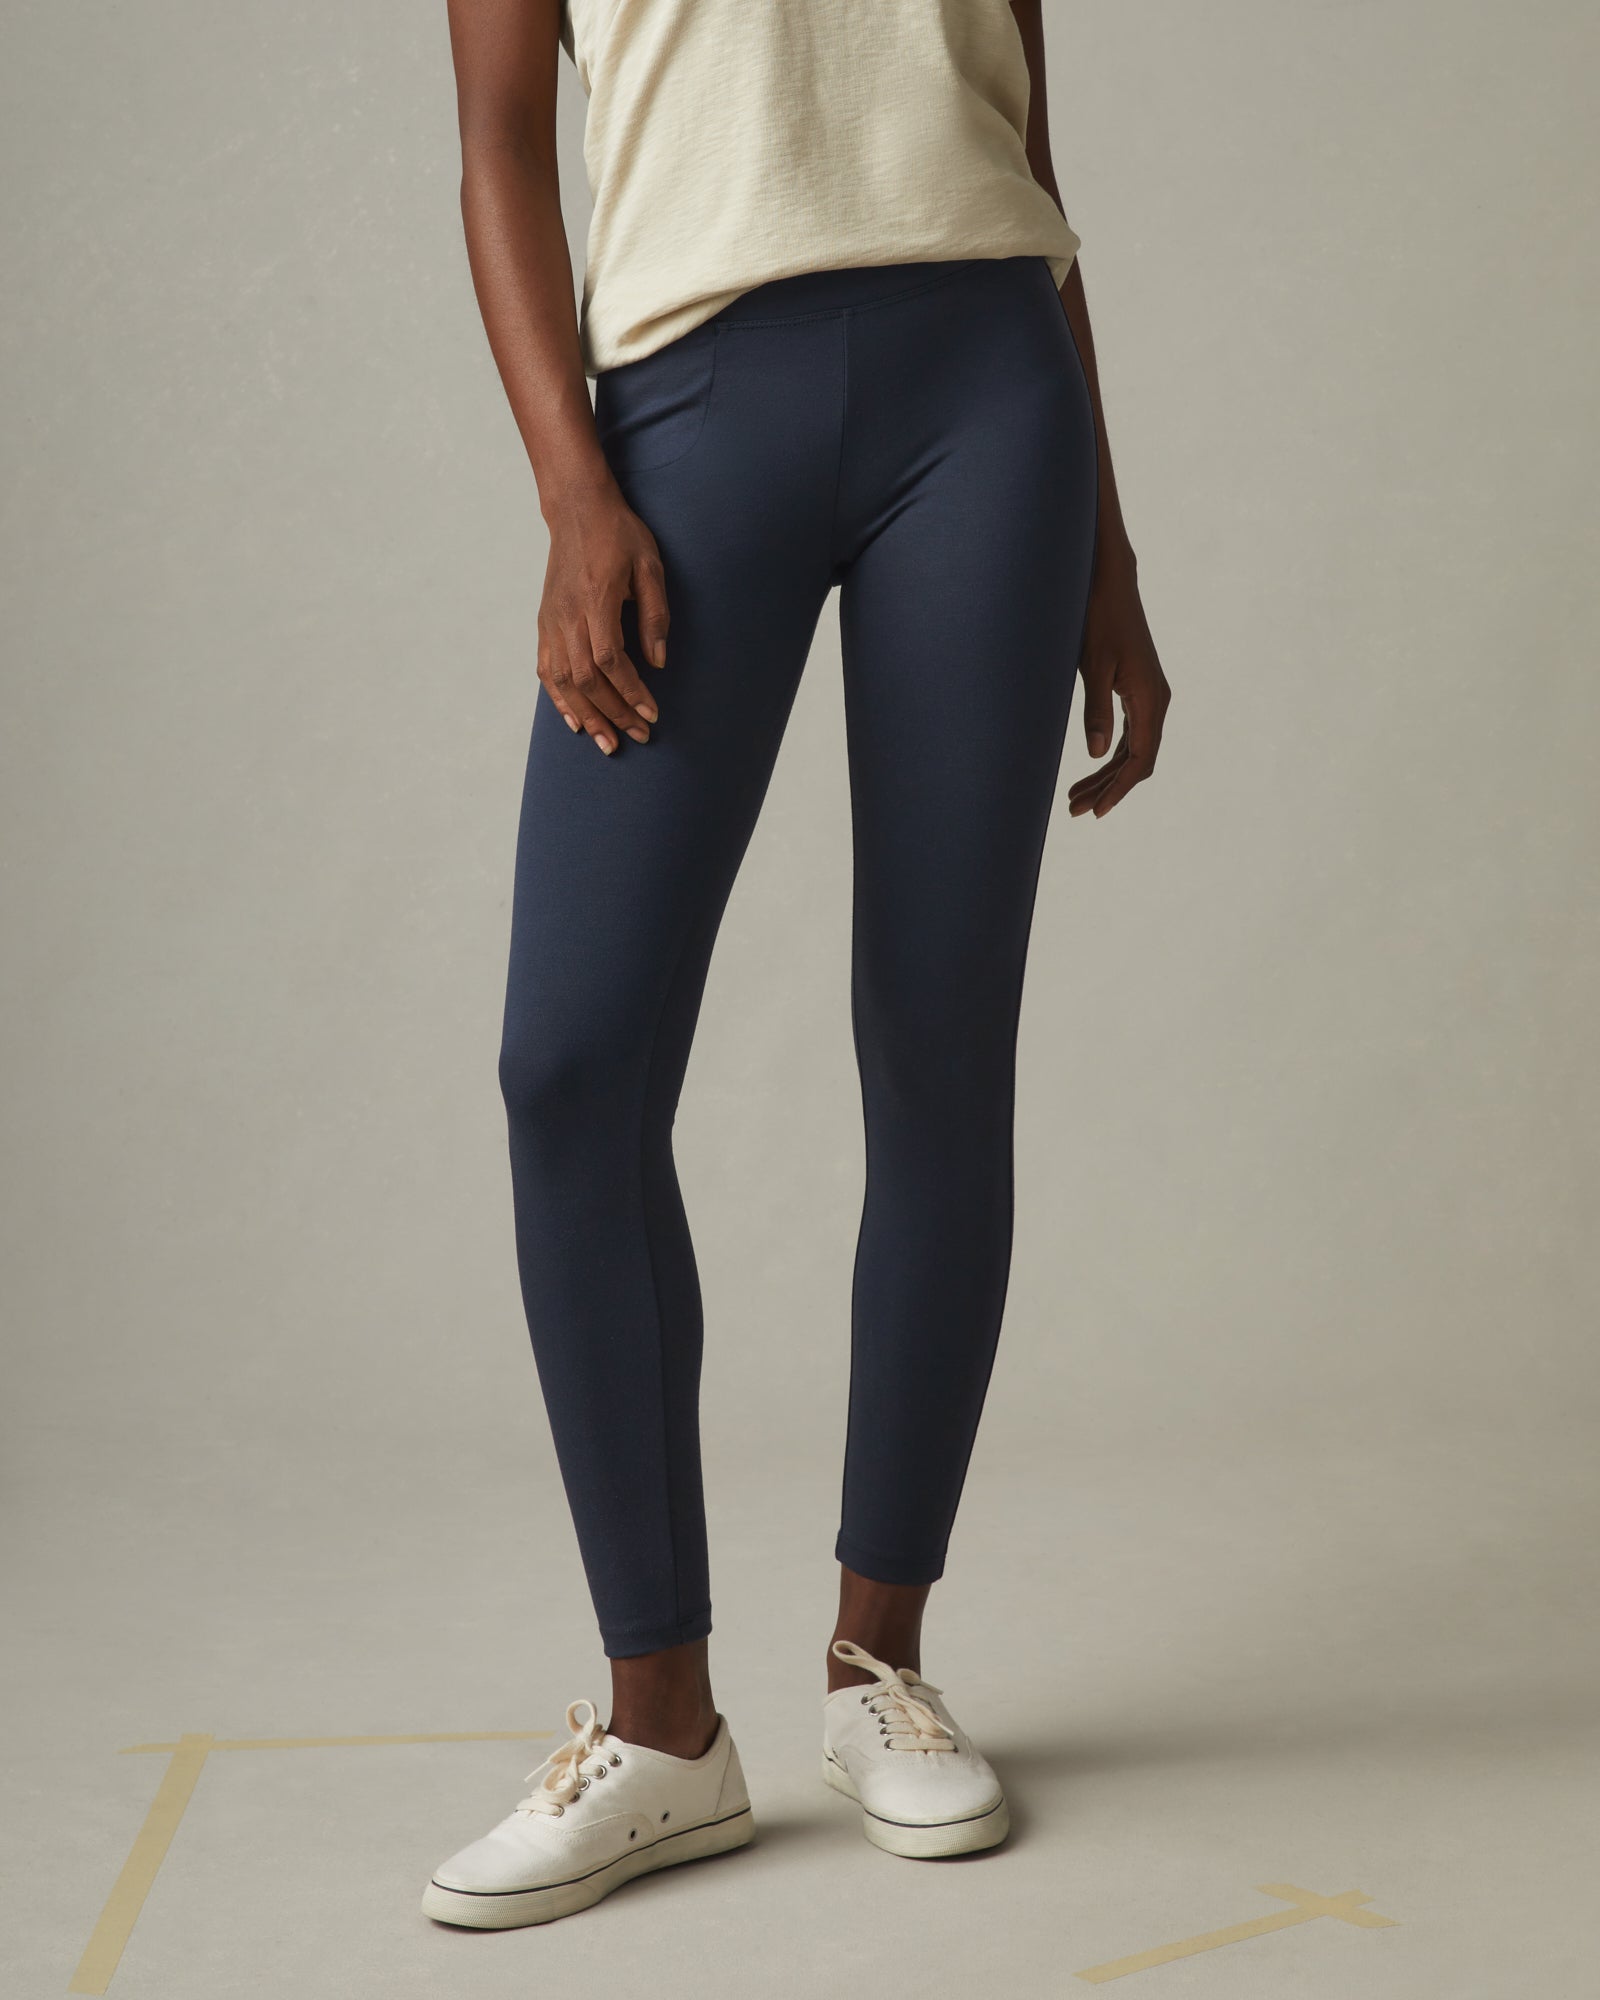 Denim Is Served Smoothing Stretch Jean - Fabletics